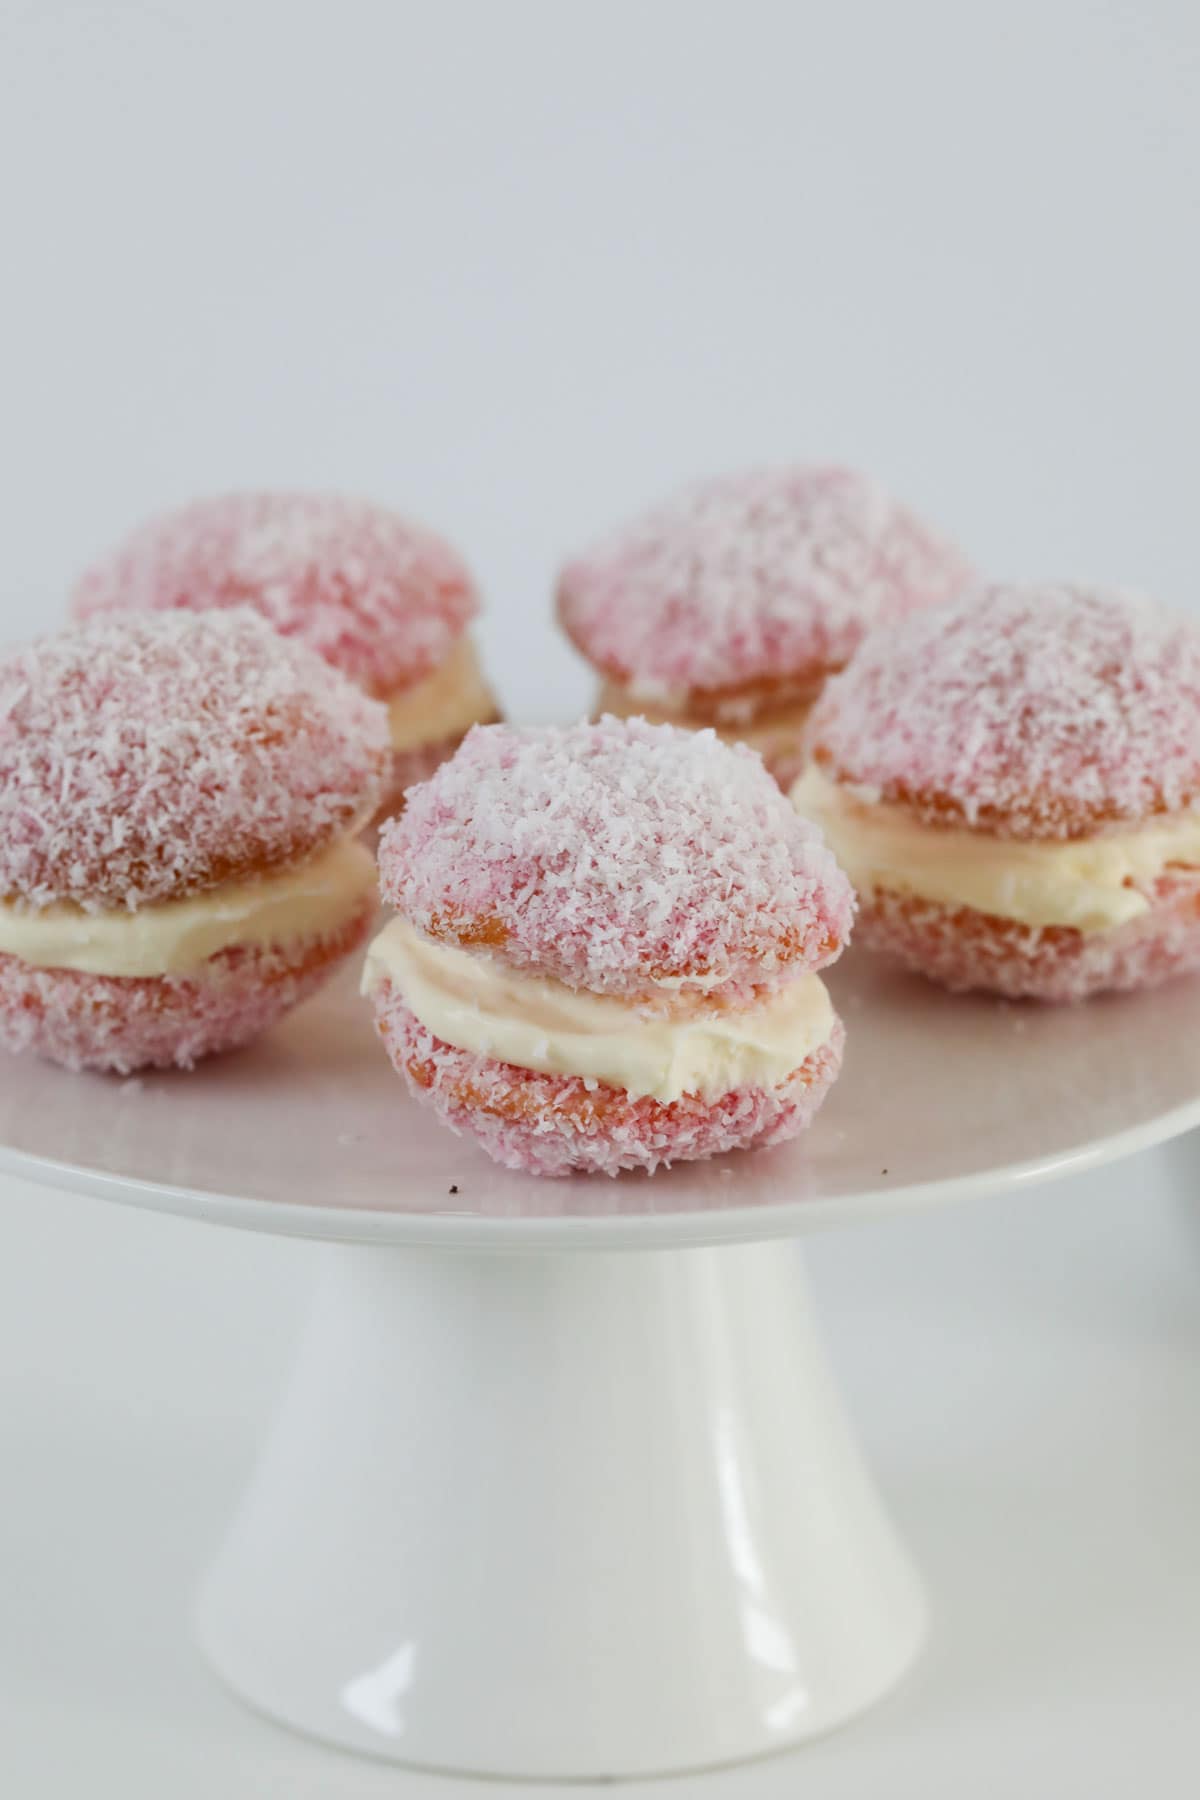 A plate of raspberry jelly cakes.